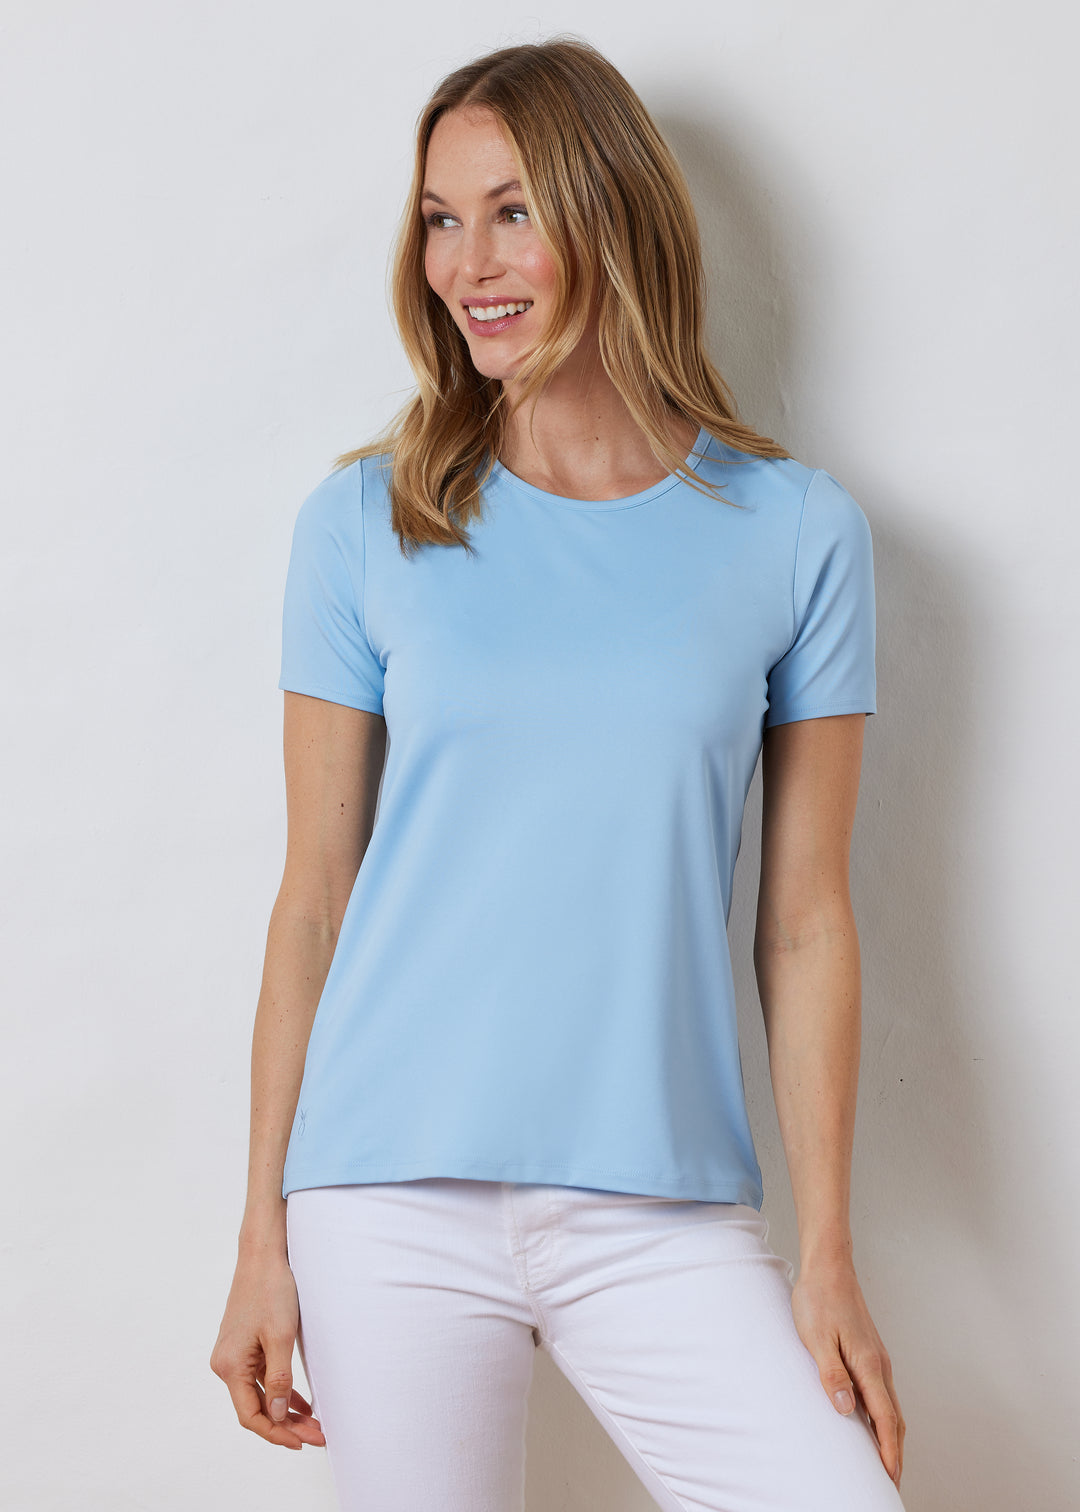 Bali Top in Luxe Stretch (Ice Blue)